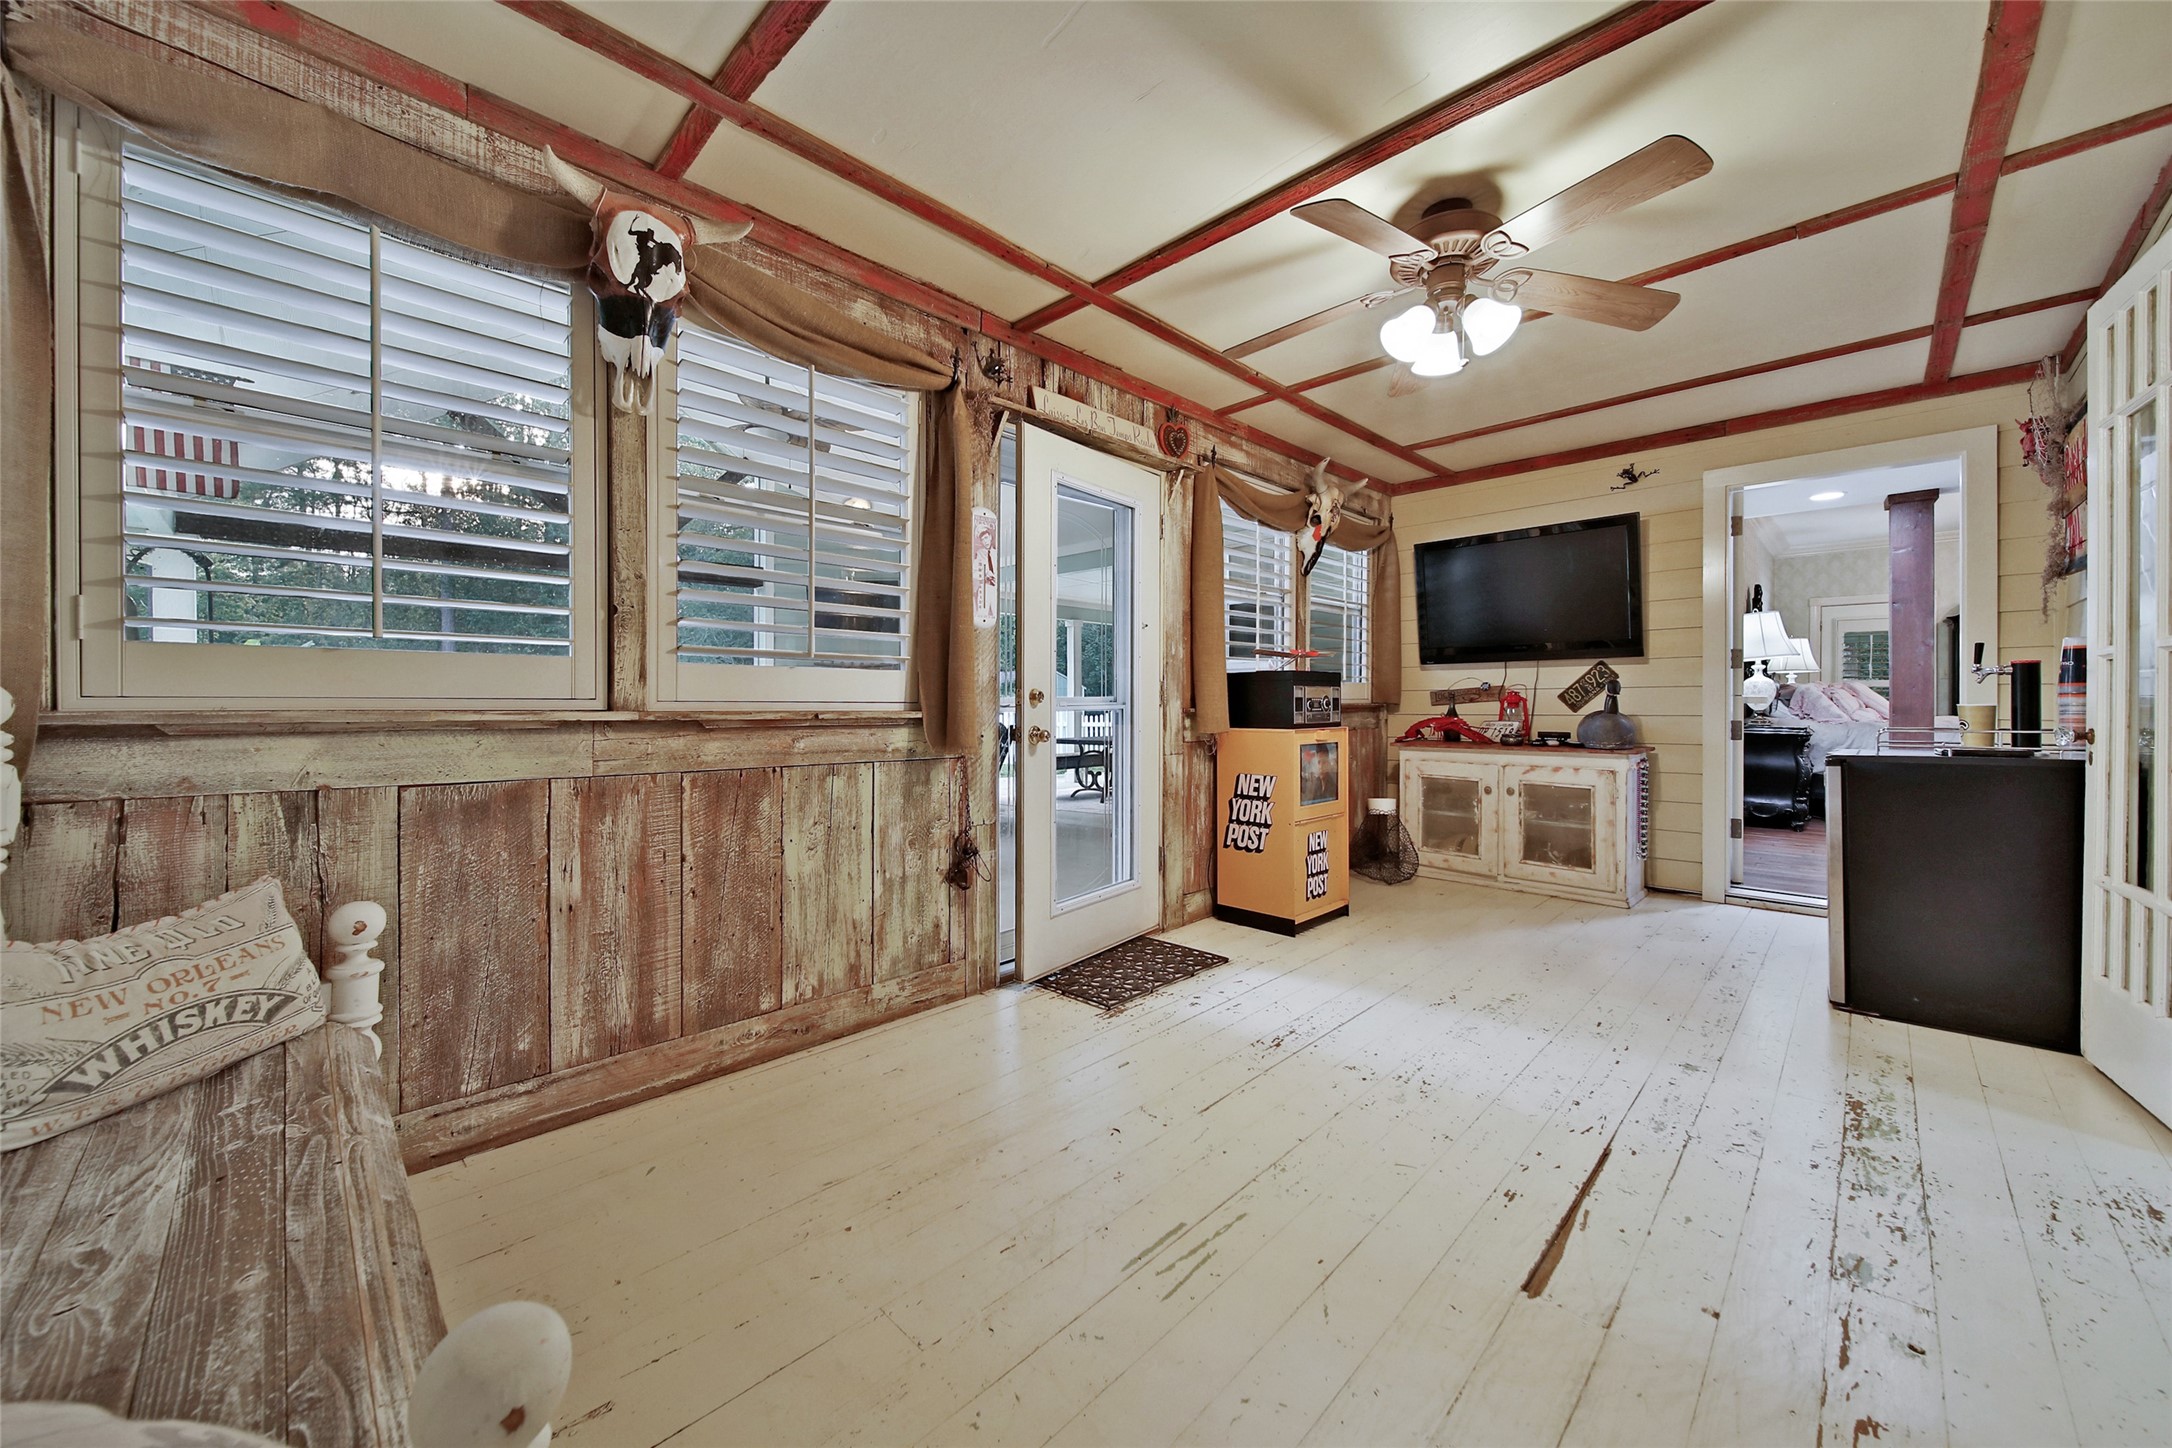 This air conditioned sunroom is the perfect space for a man-cave, or relaxing morning coffee